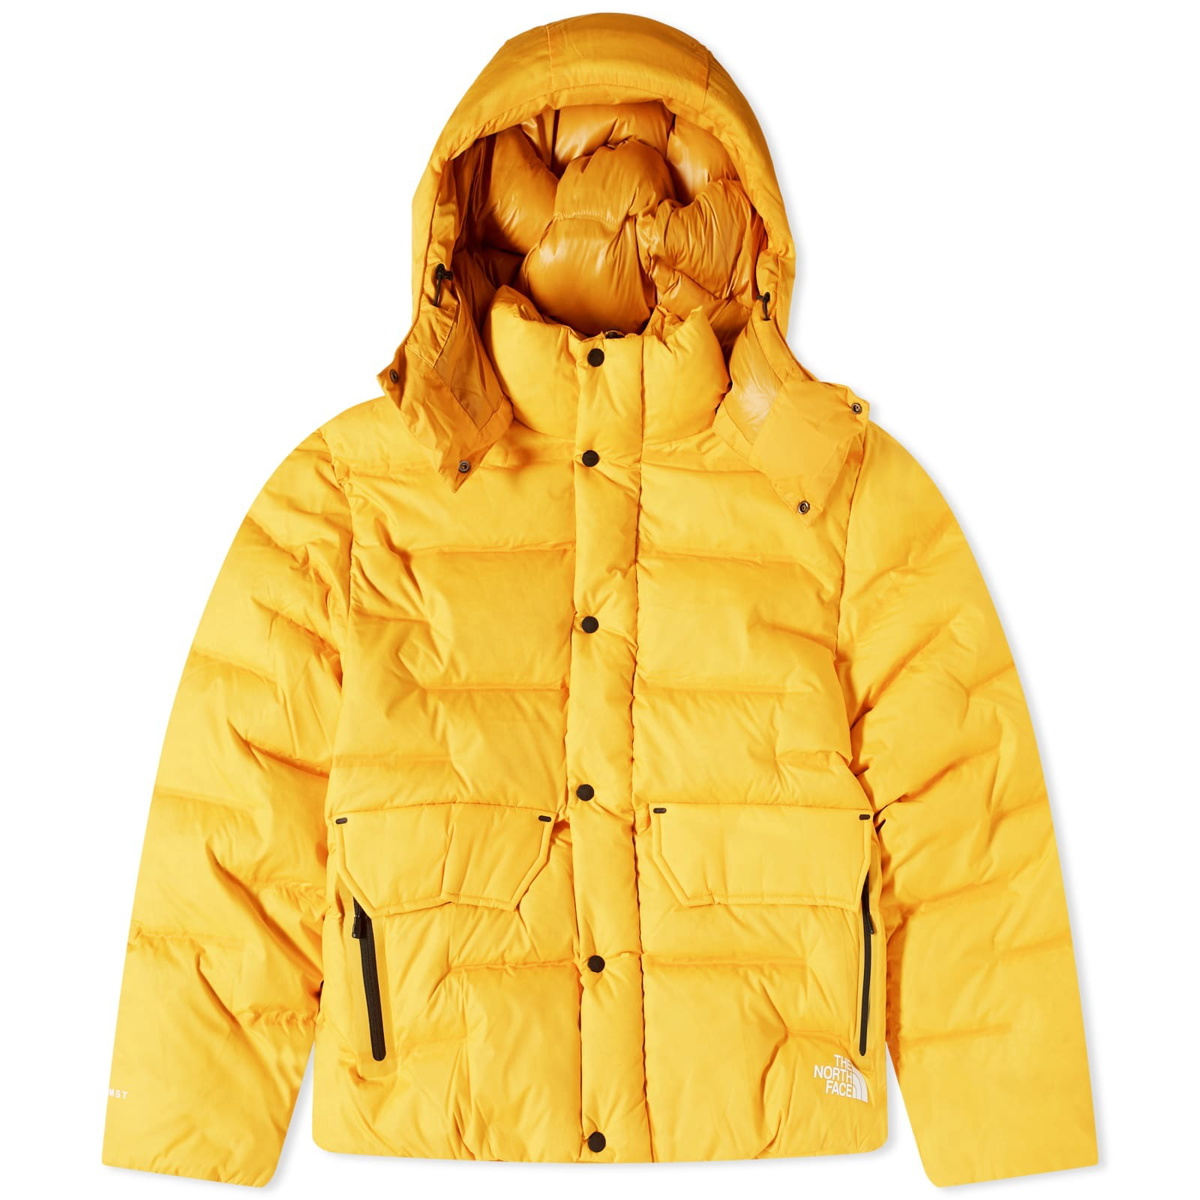 The North Face Men's Remastered Sierra Parka Jacket in Summit Gold The  North Face